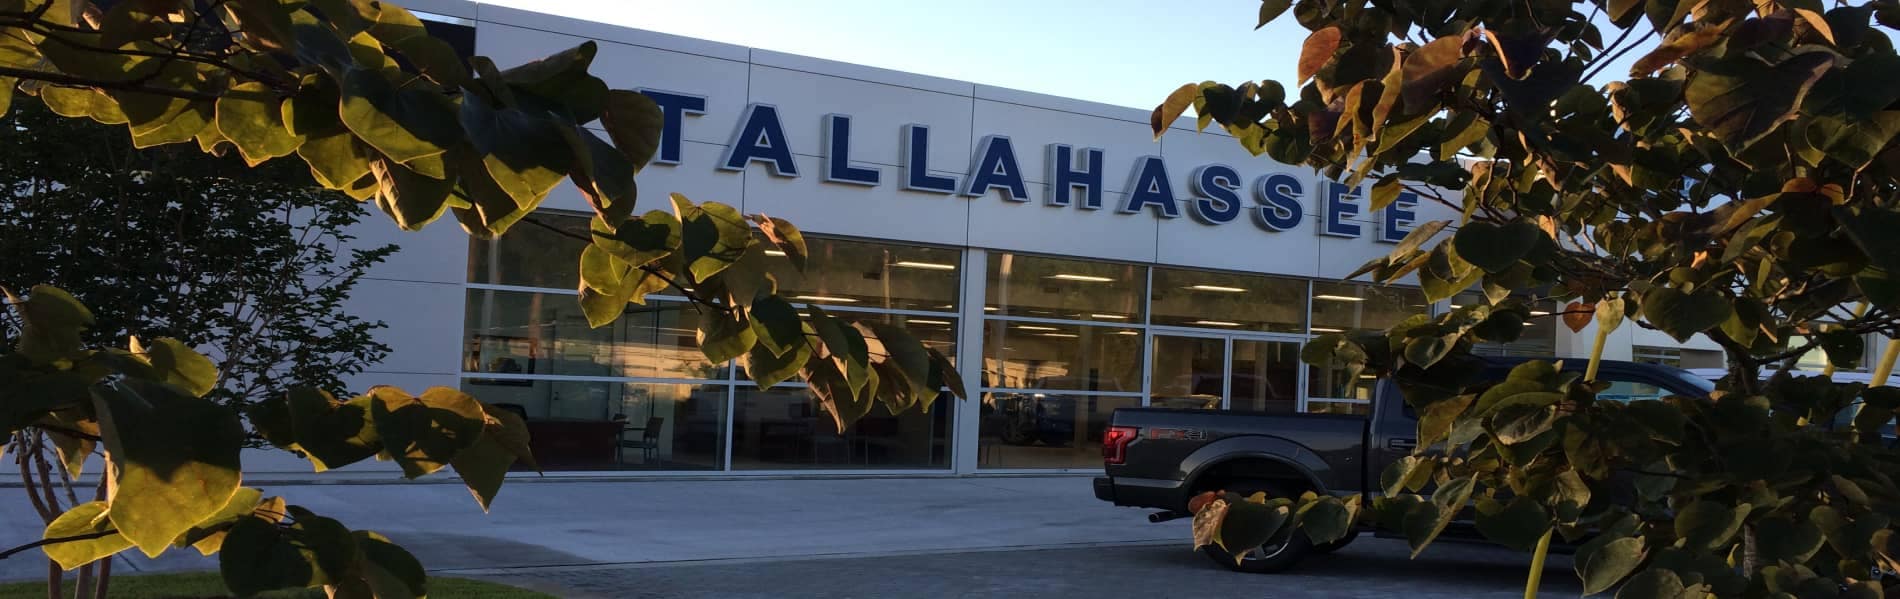 Tallahassee Ford